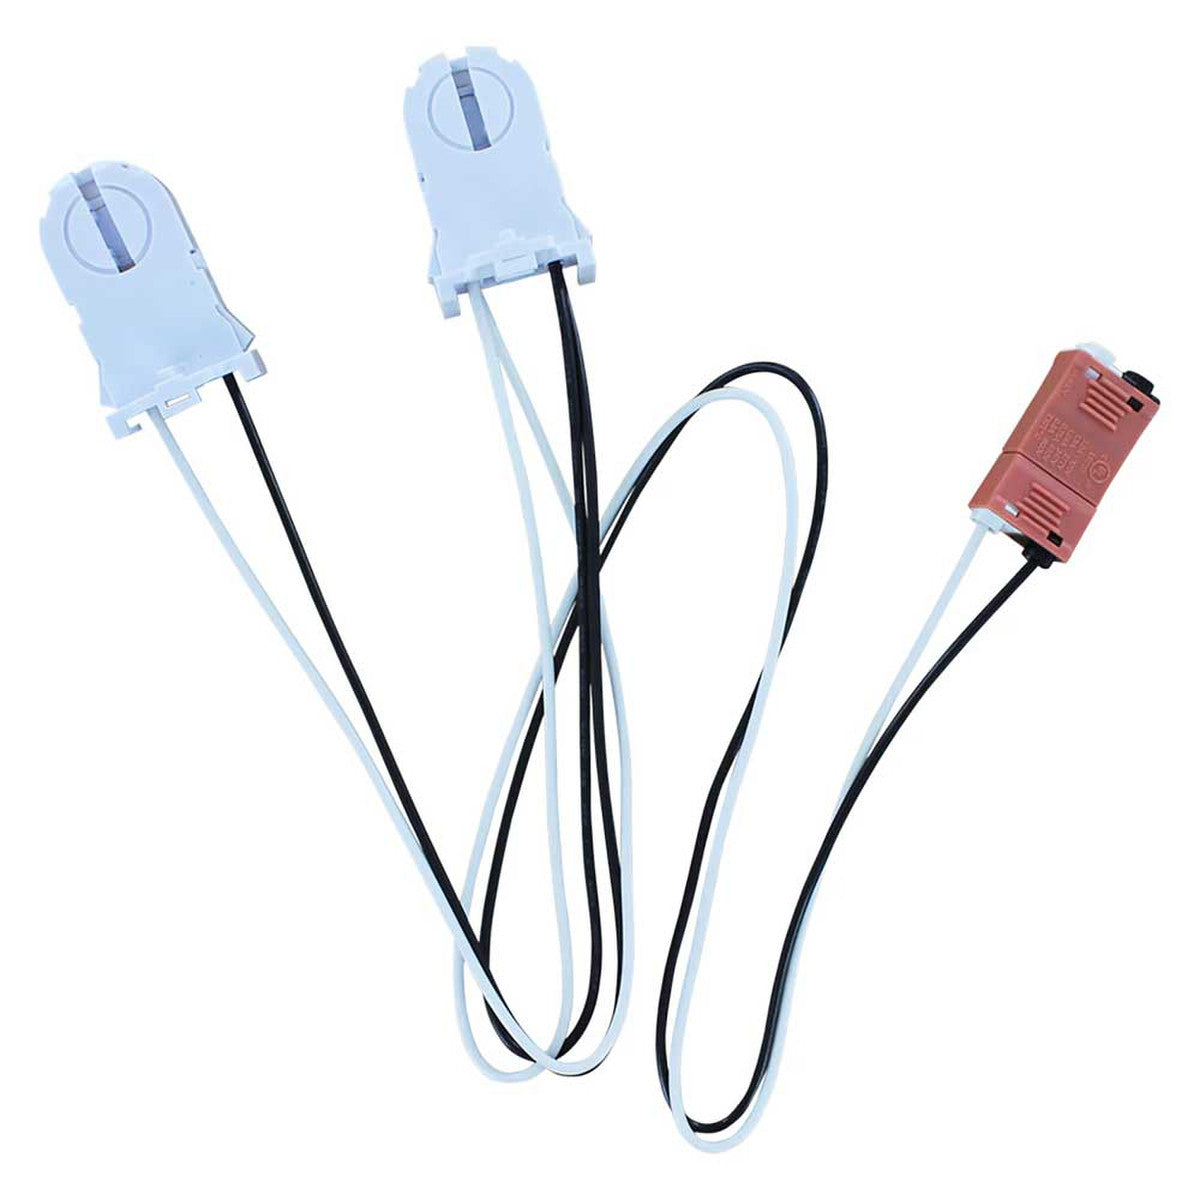 GLT GLT-SOCKET-T8-U-T-2-W 2-Lamp Wiring Harness with Tall Non-shunted Sockets for LED Tubes